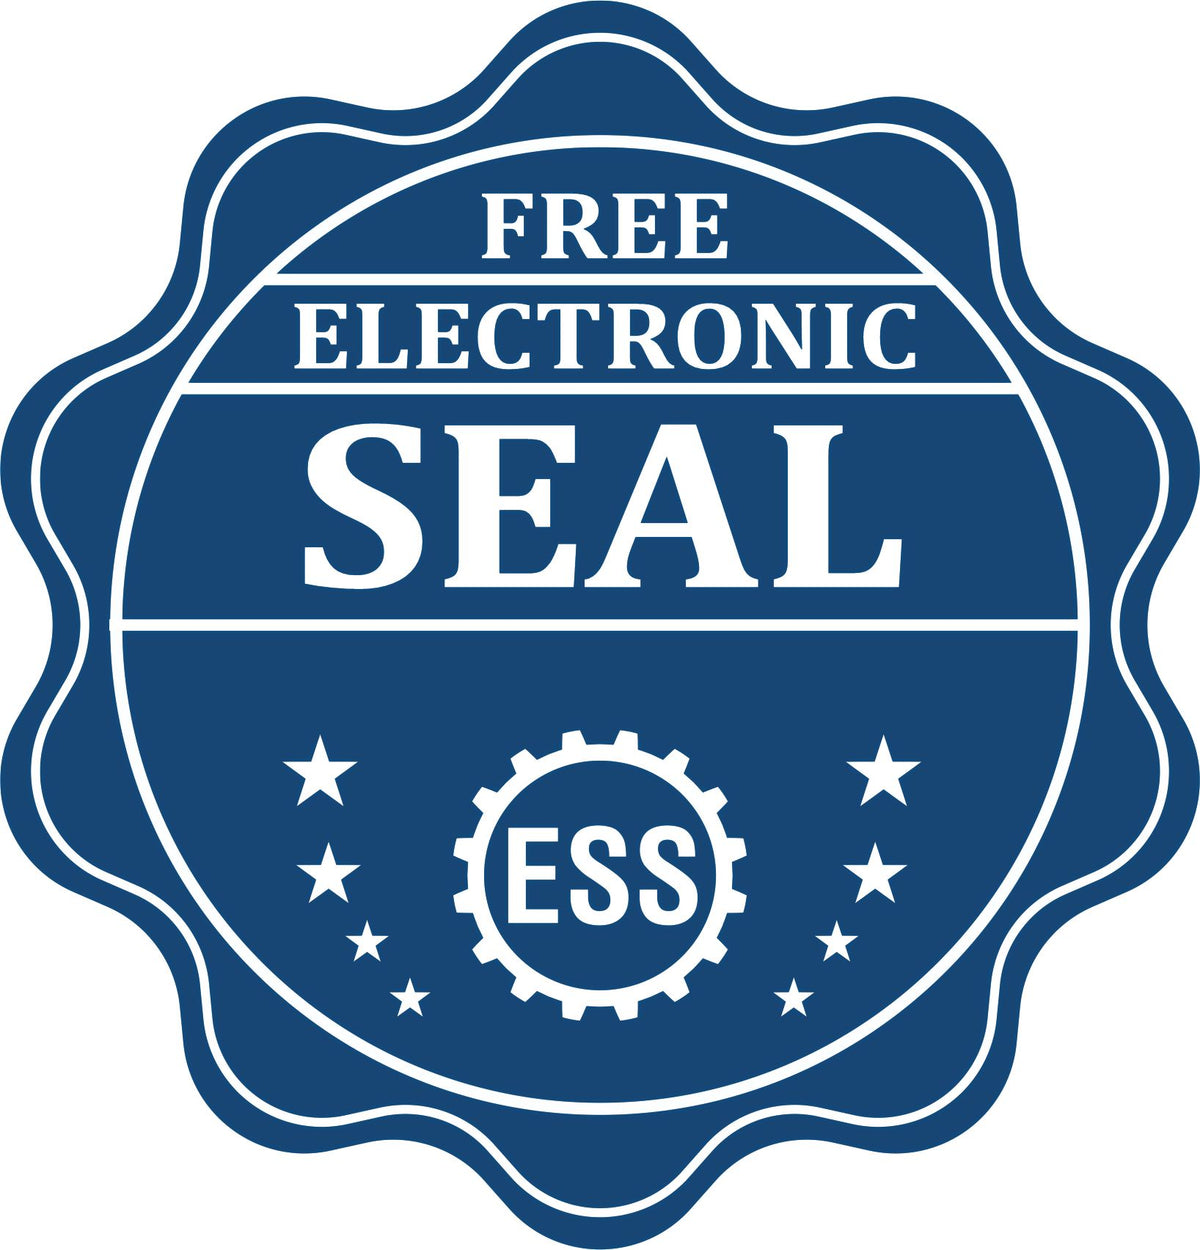 A badge showing a free electronic seal for the Handheld Nebraska Professional Engineer Embosser with stars and the ESS gear on the emblem.